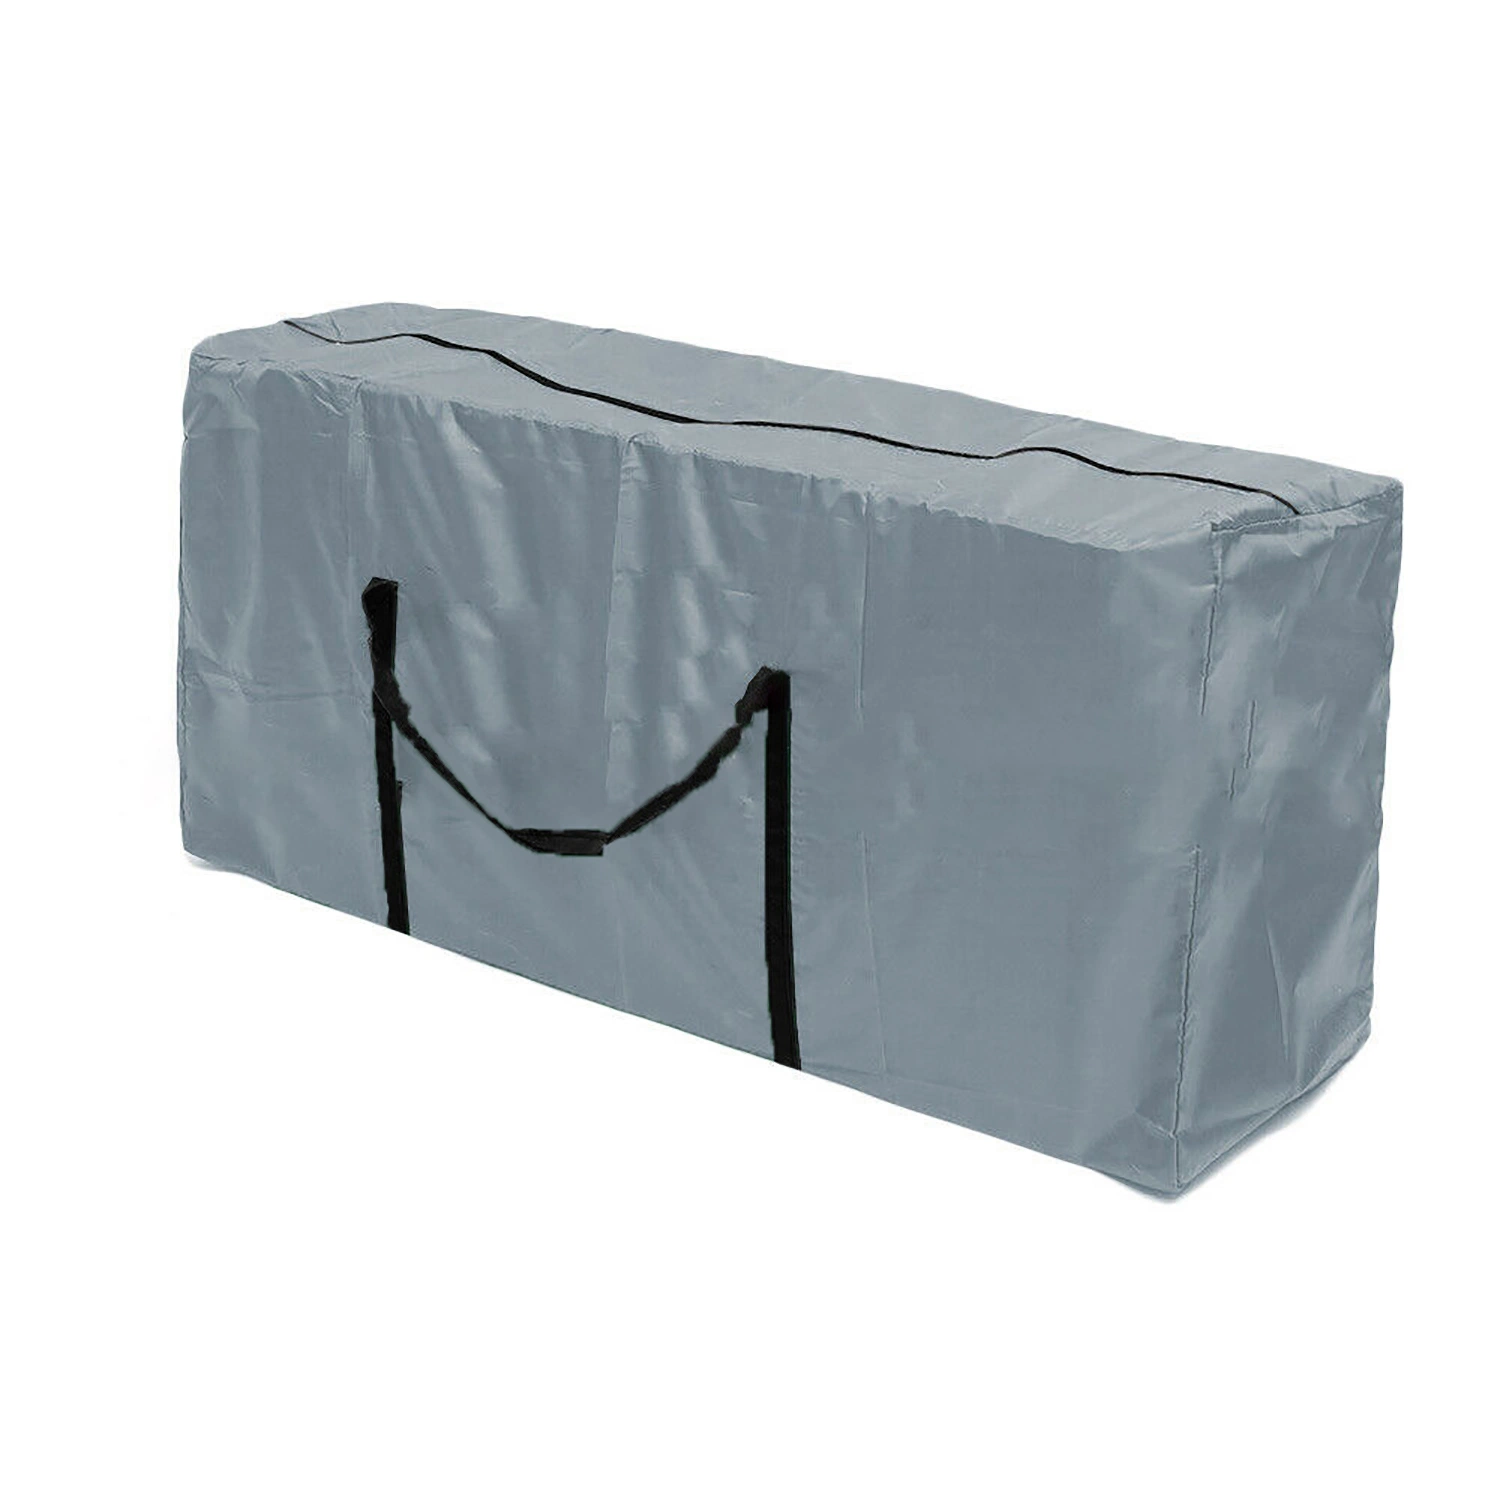 Waterproof Extra Large Oxford Cloth Pocket Dustproof Outdoor Cushion Storage Bags Furniture Storage Bag with Handles Wyz21785